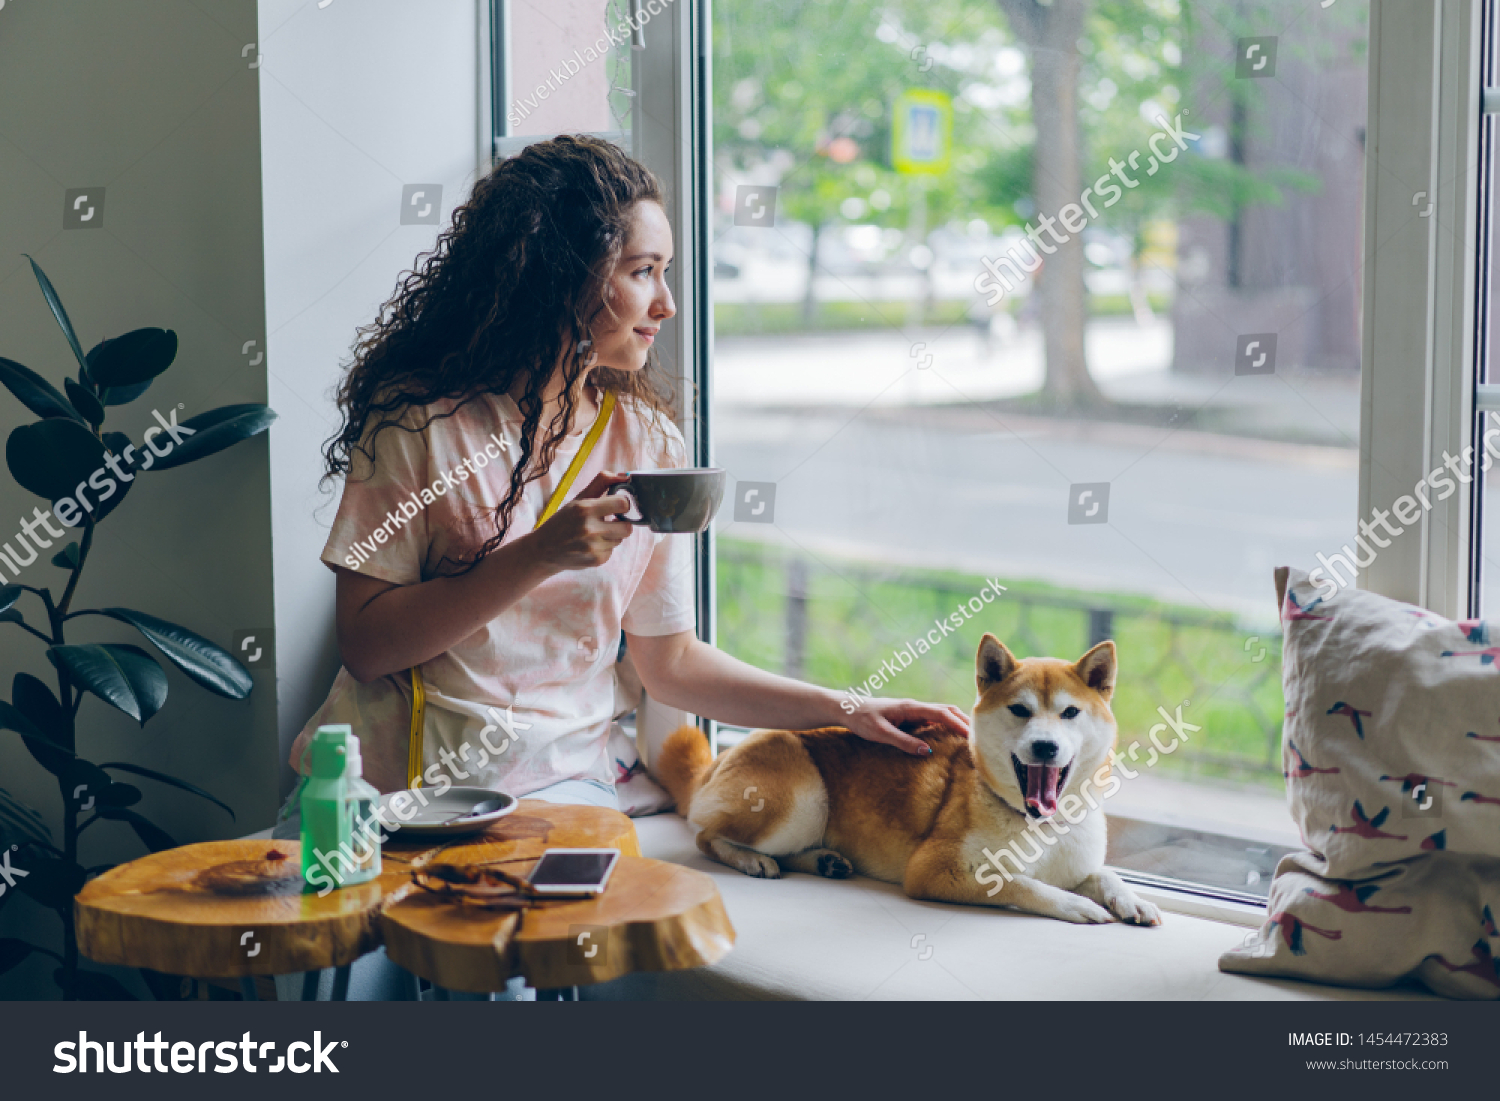 Happy student pretty girl is stroking adorable shiba inu dog sitting in cafe on window sill with cup of tea and enjoying leisure time. People and relaxation concept. #1454472383